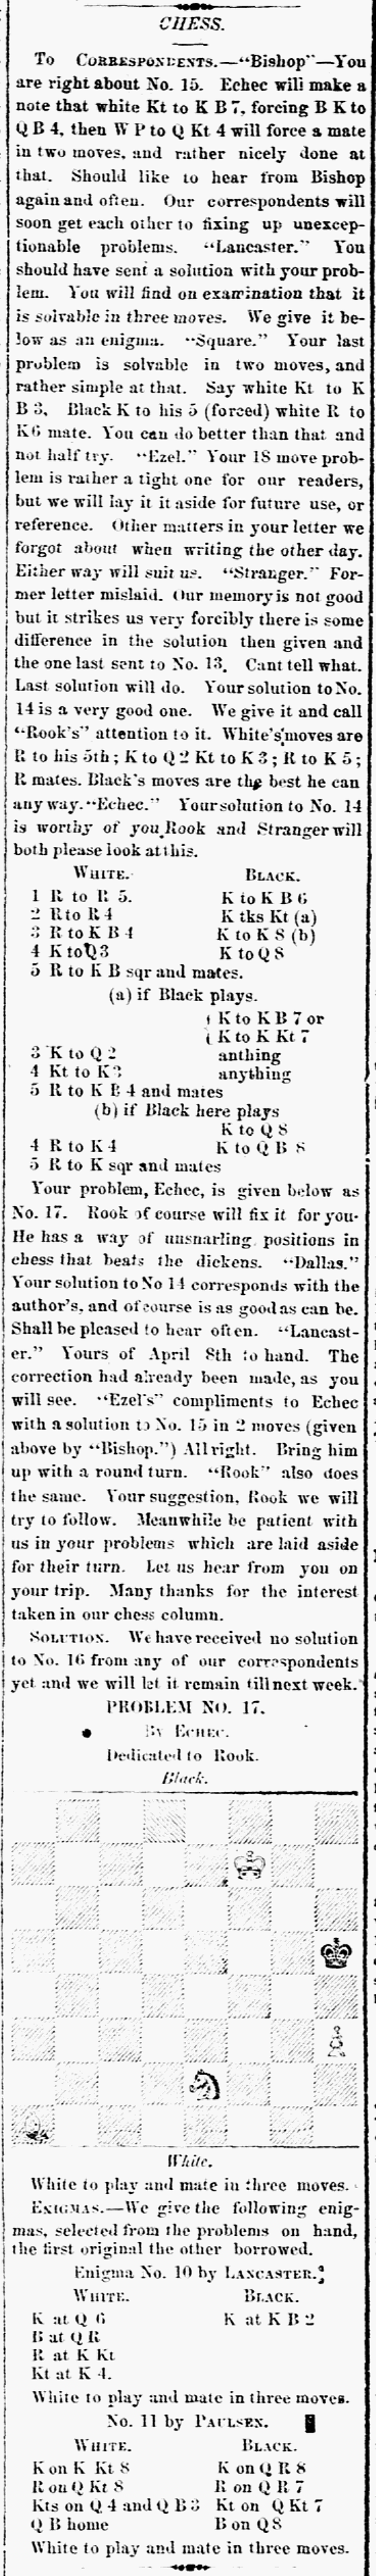 1859.04.20-01 Houston Weekly Telegraph.png